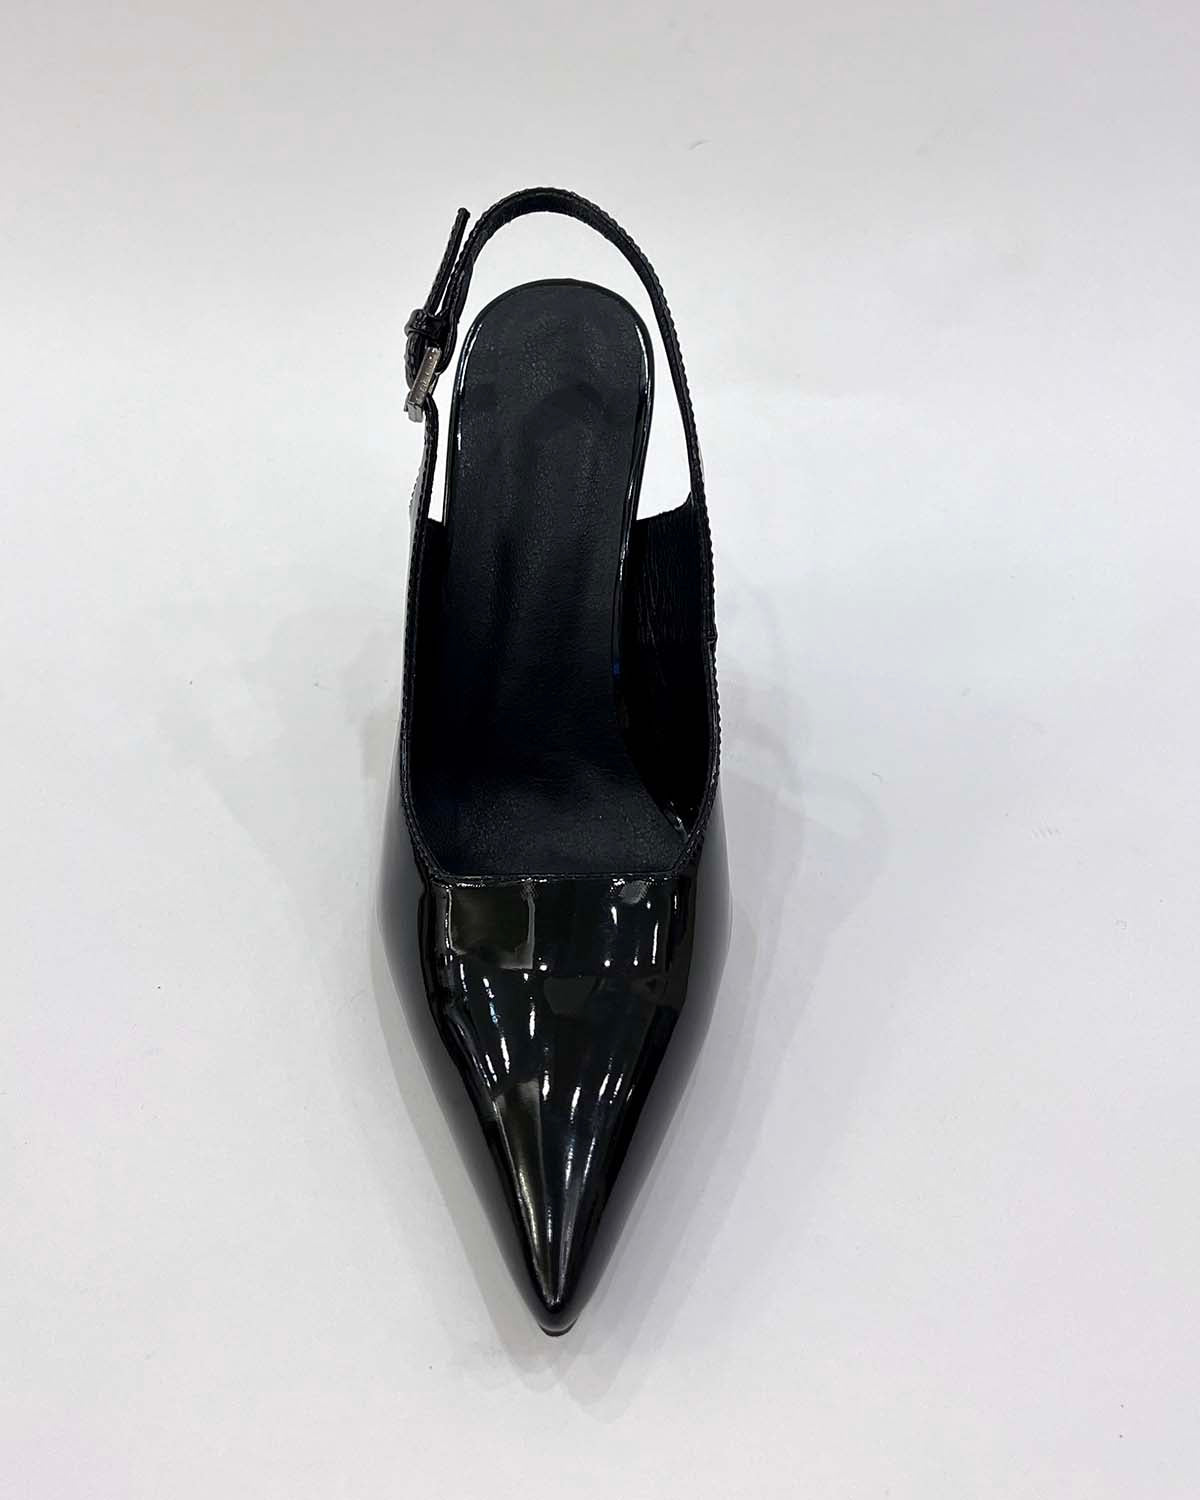 Pointed toe patent leather slingback women pumps shoes